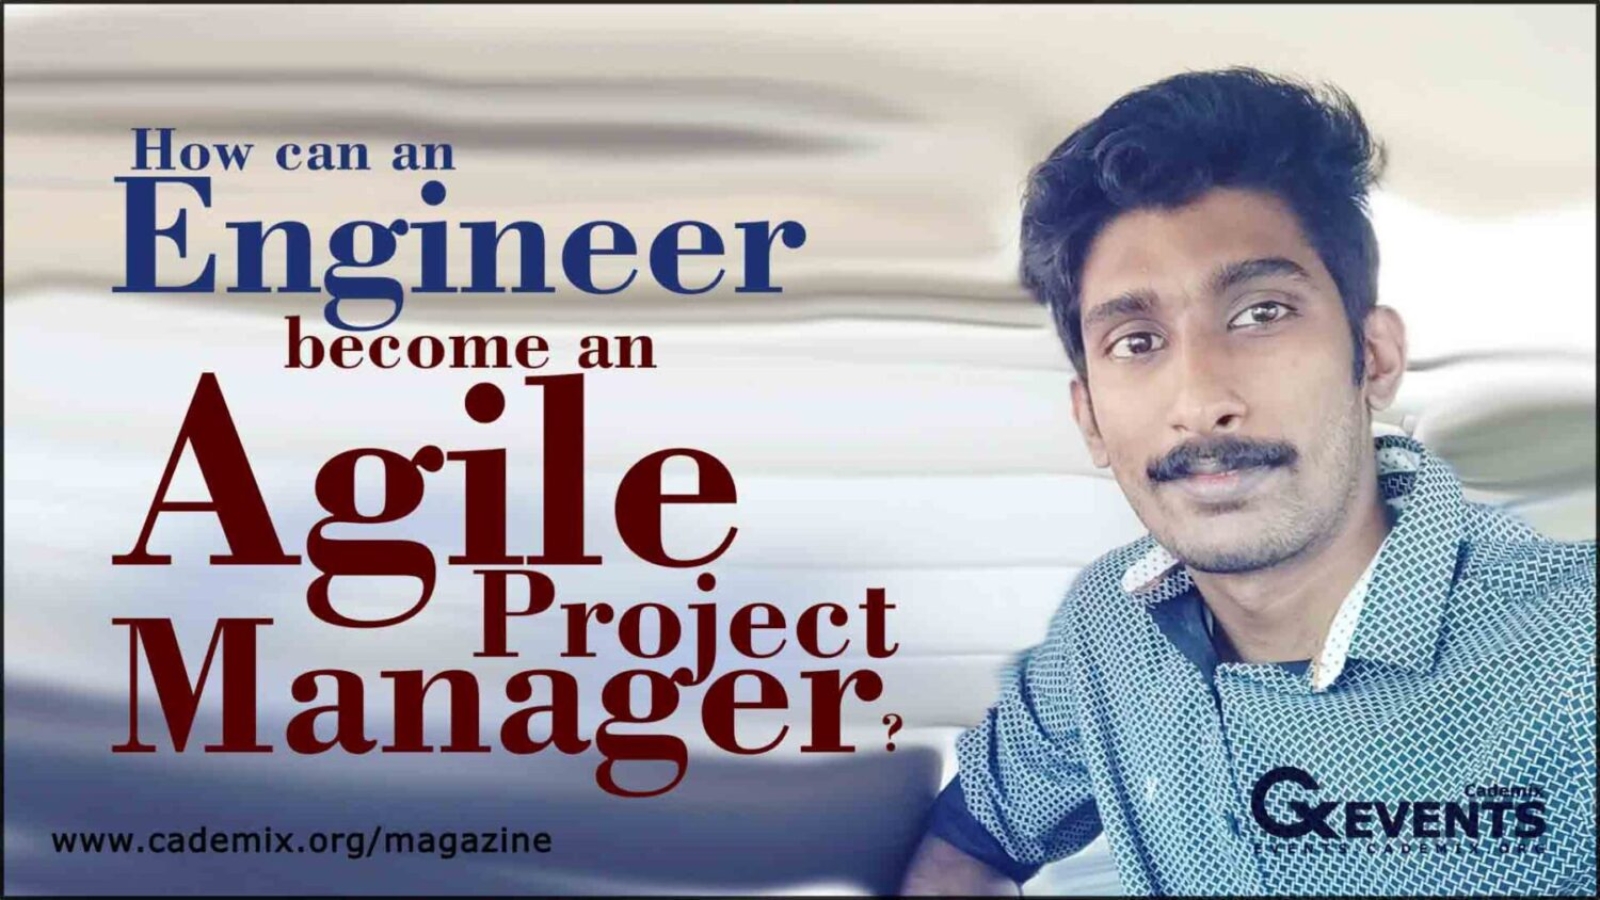 How Engineer become Agile Project Manager Nivin Anil Cademix Magazine